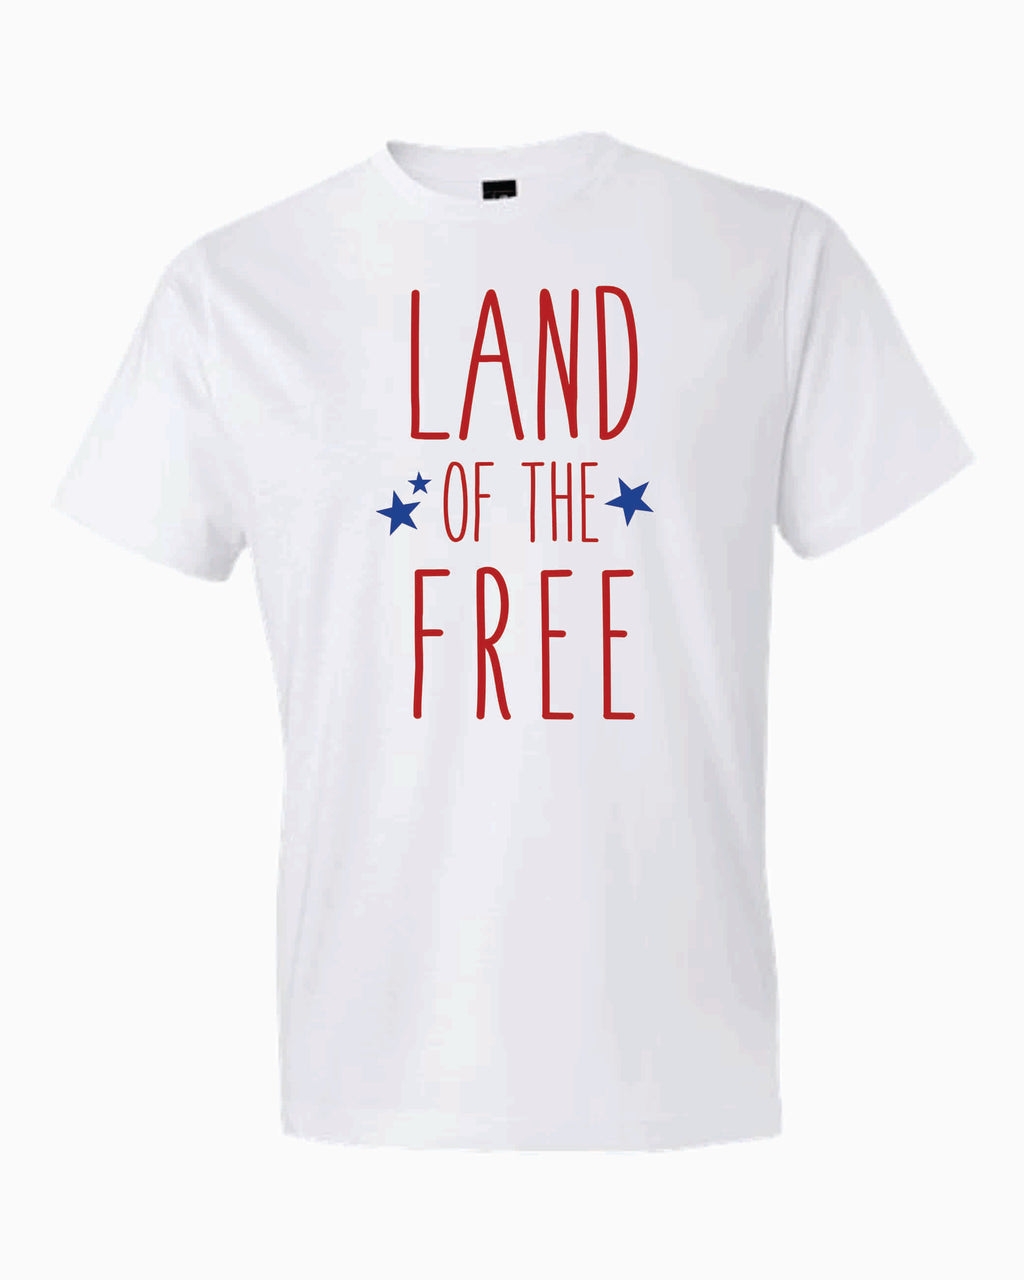 Land of the Free T-shirt - Youth Sizes